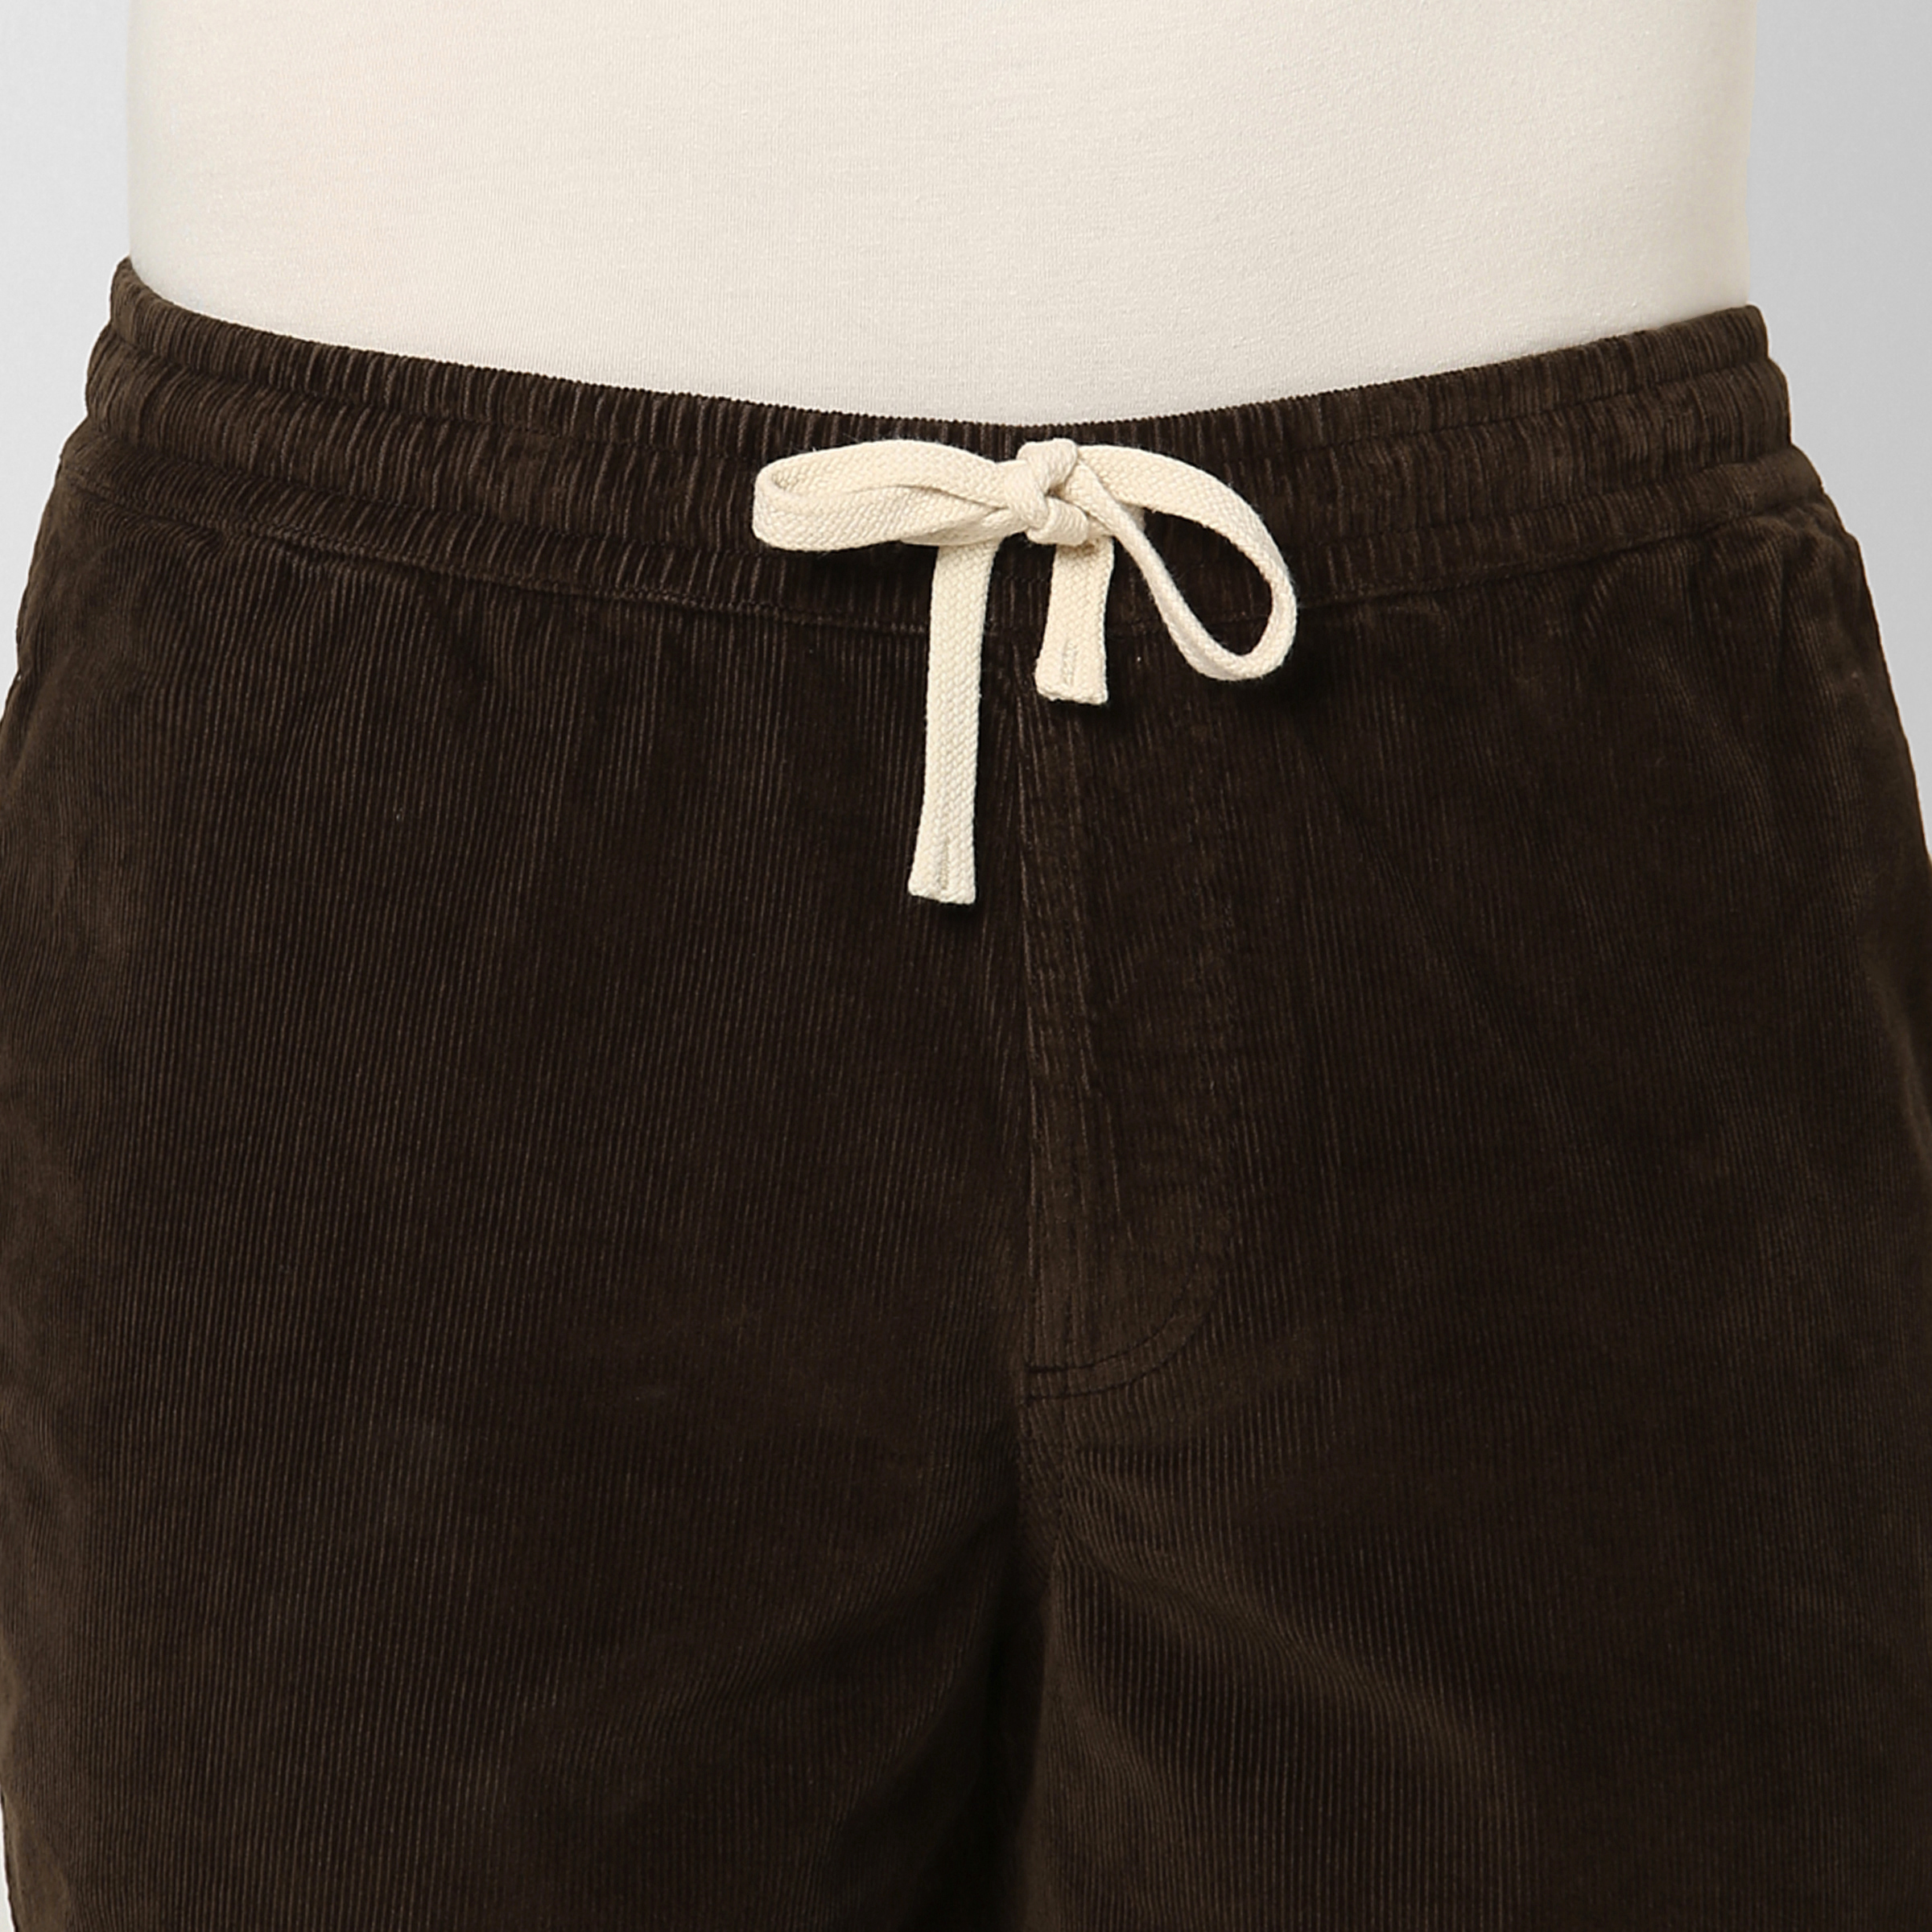 Corduroy Easy Short Cocoa close up front with drawstring